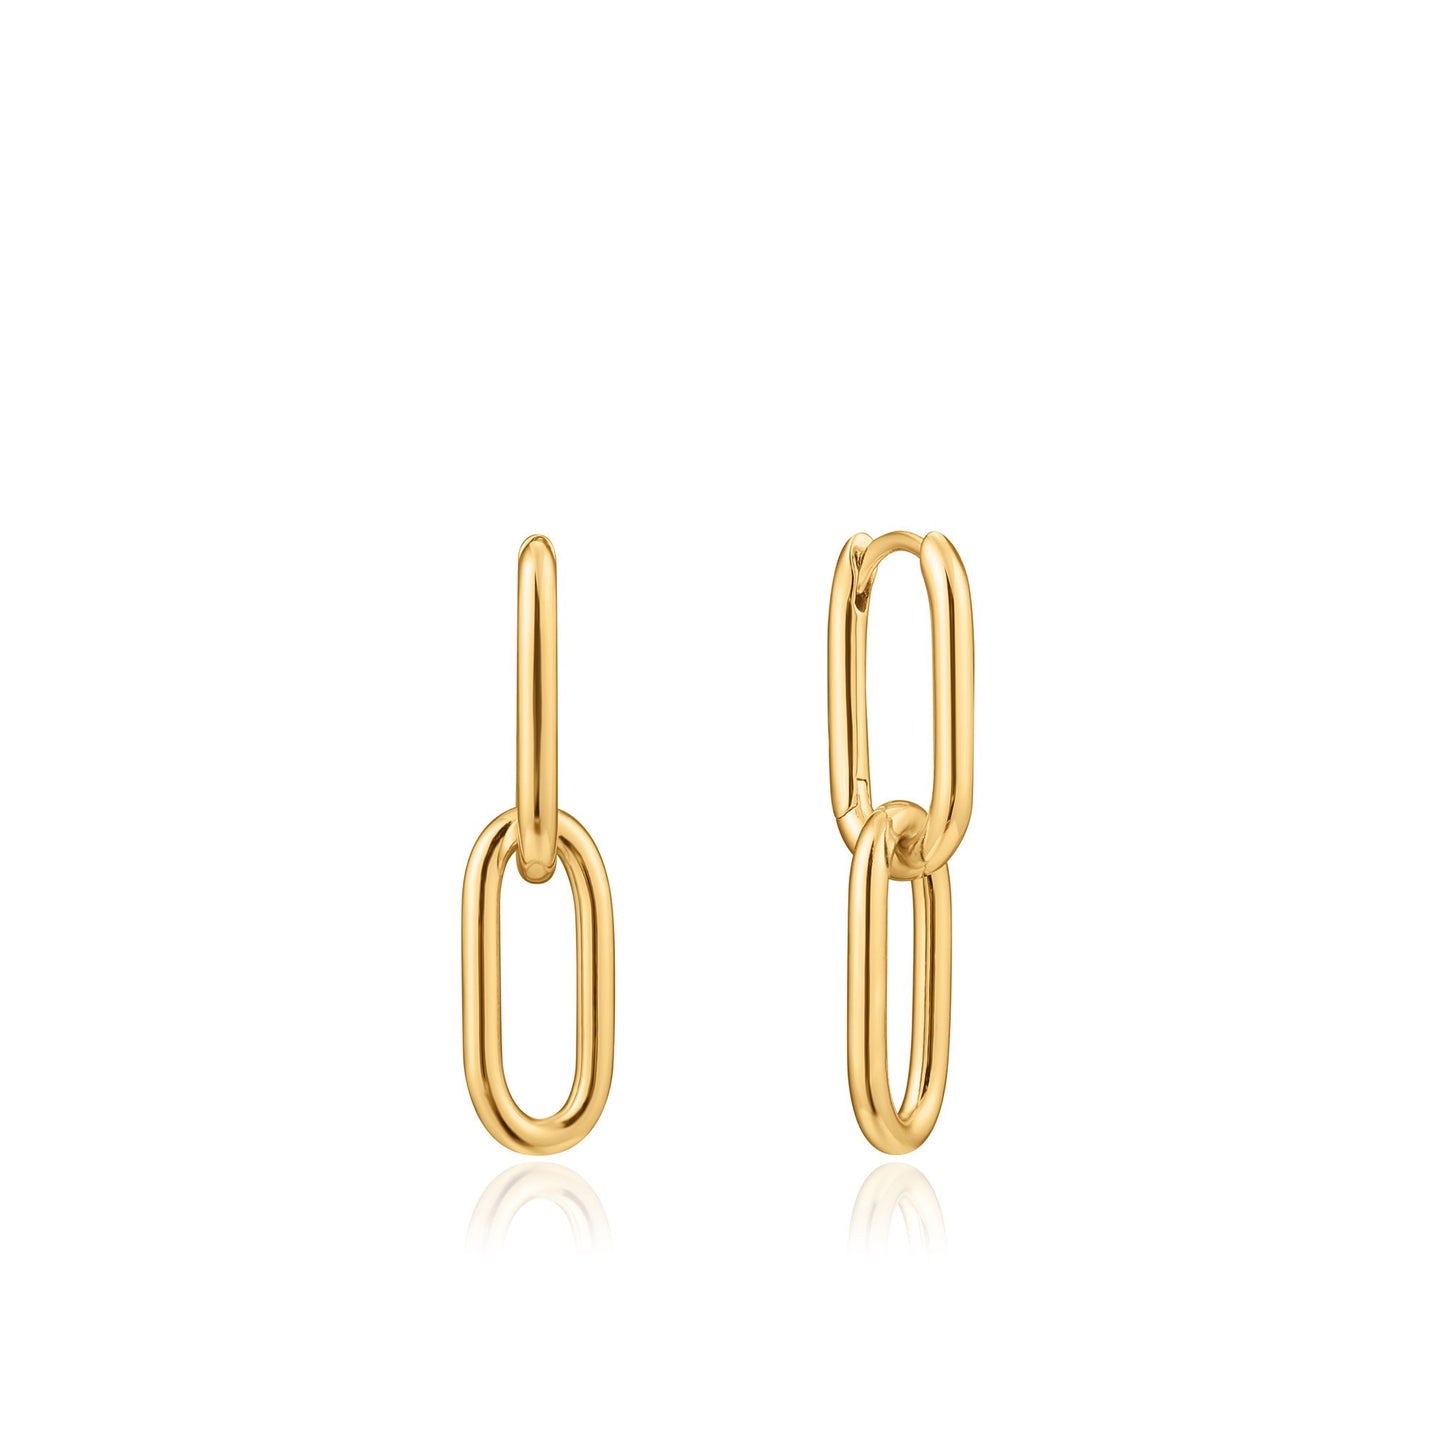 ANIA HAIE ANIA HAIE - Gold Cable Link Earrings available at The Good Life Boutique